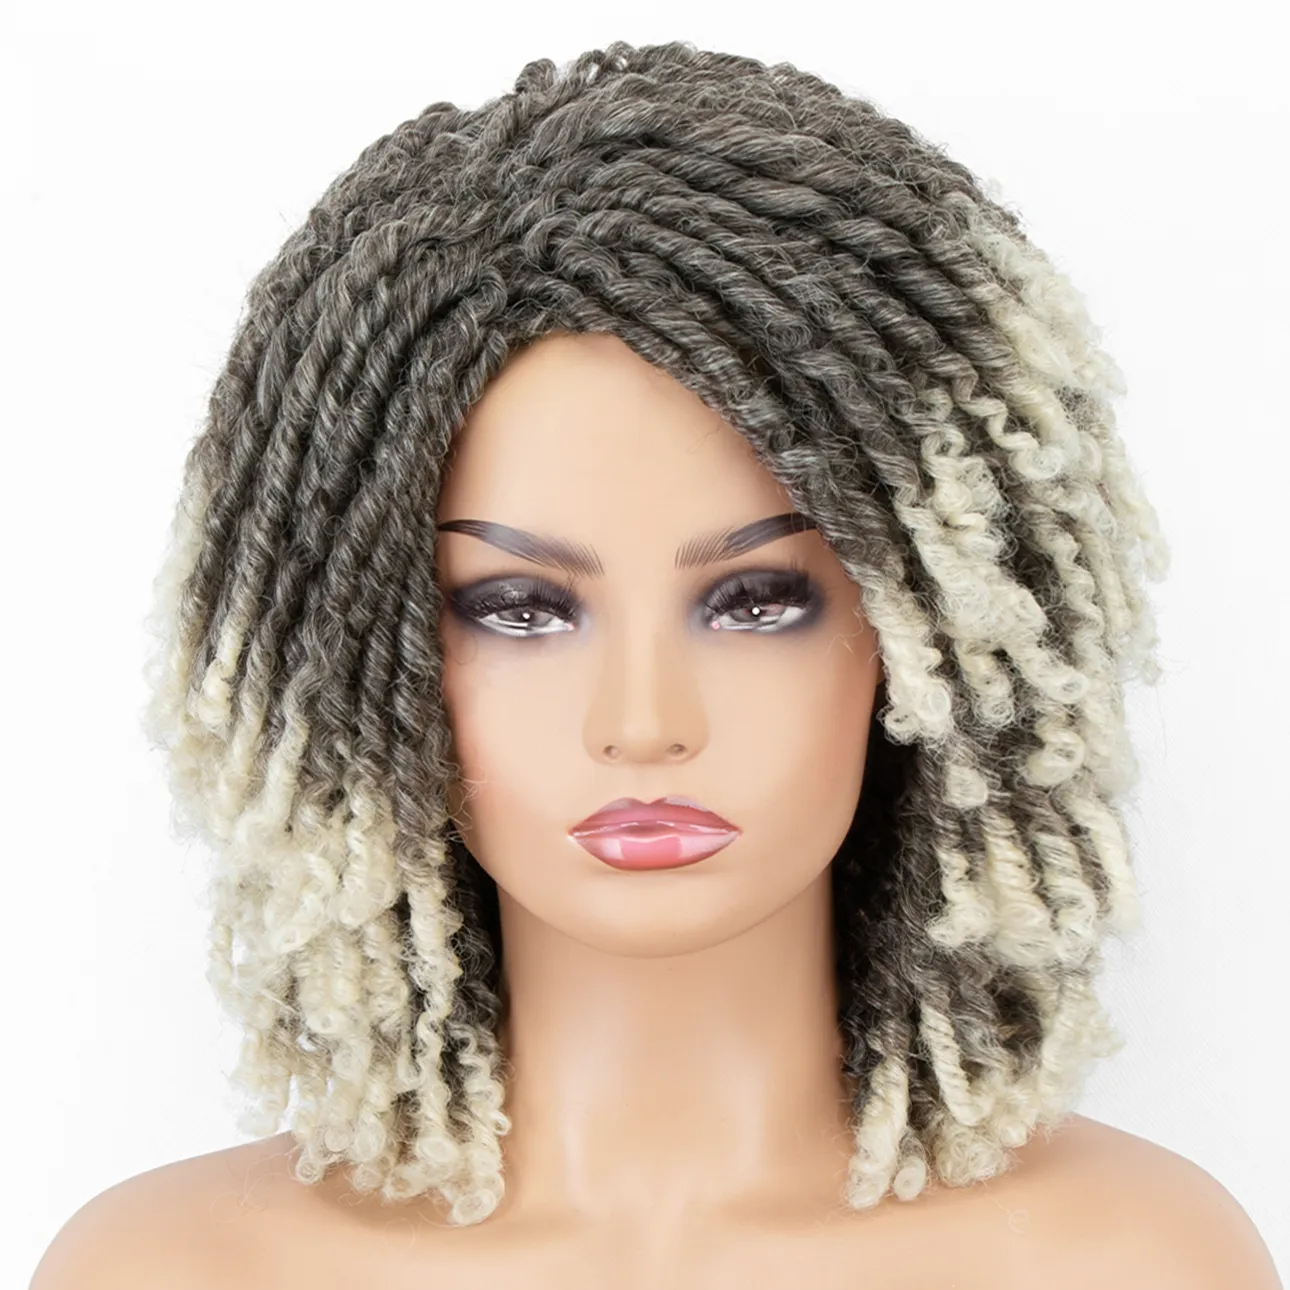 Dreadlocks Synthetic Wigs For Women Short Soft Brown Fashion Afro Kinky Curly Hair With Bangs Crochet Twist Hair Wigsfactory direct